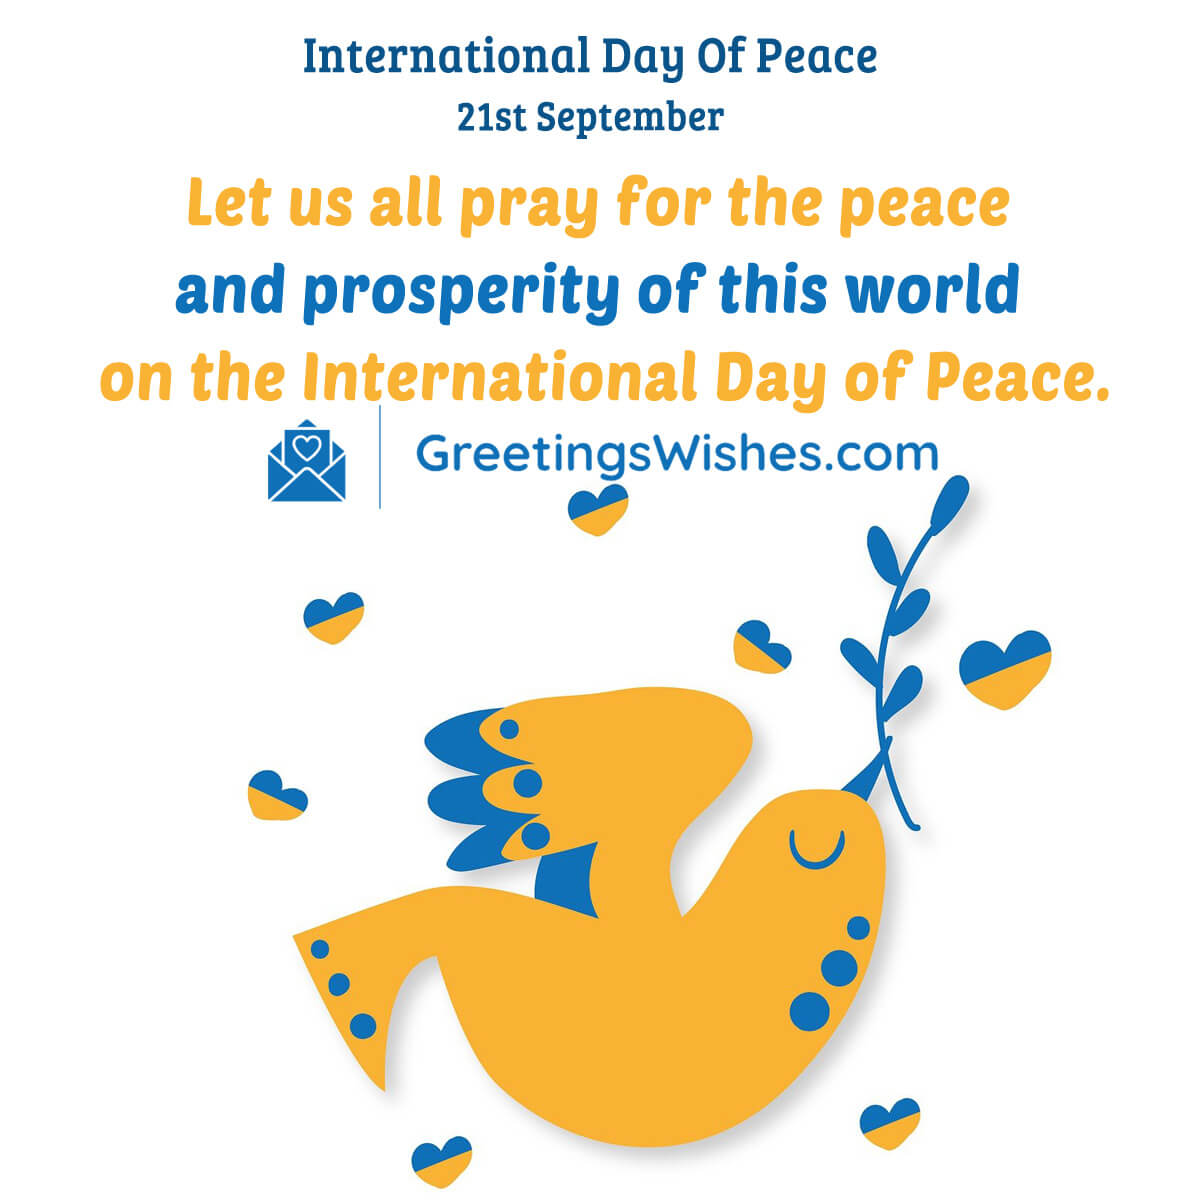 International Day Of Peace Wishes (21st September)